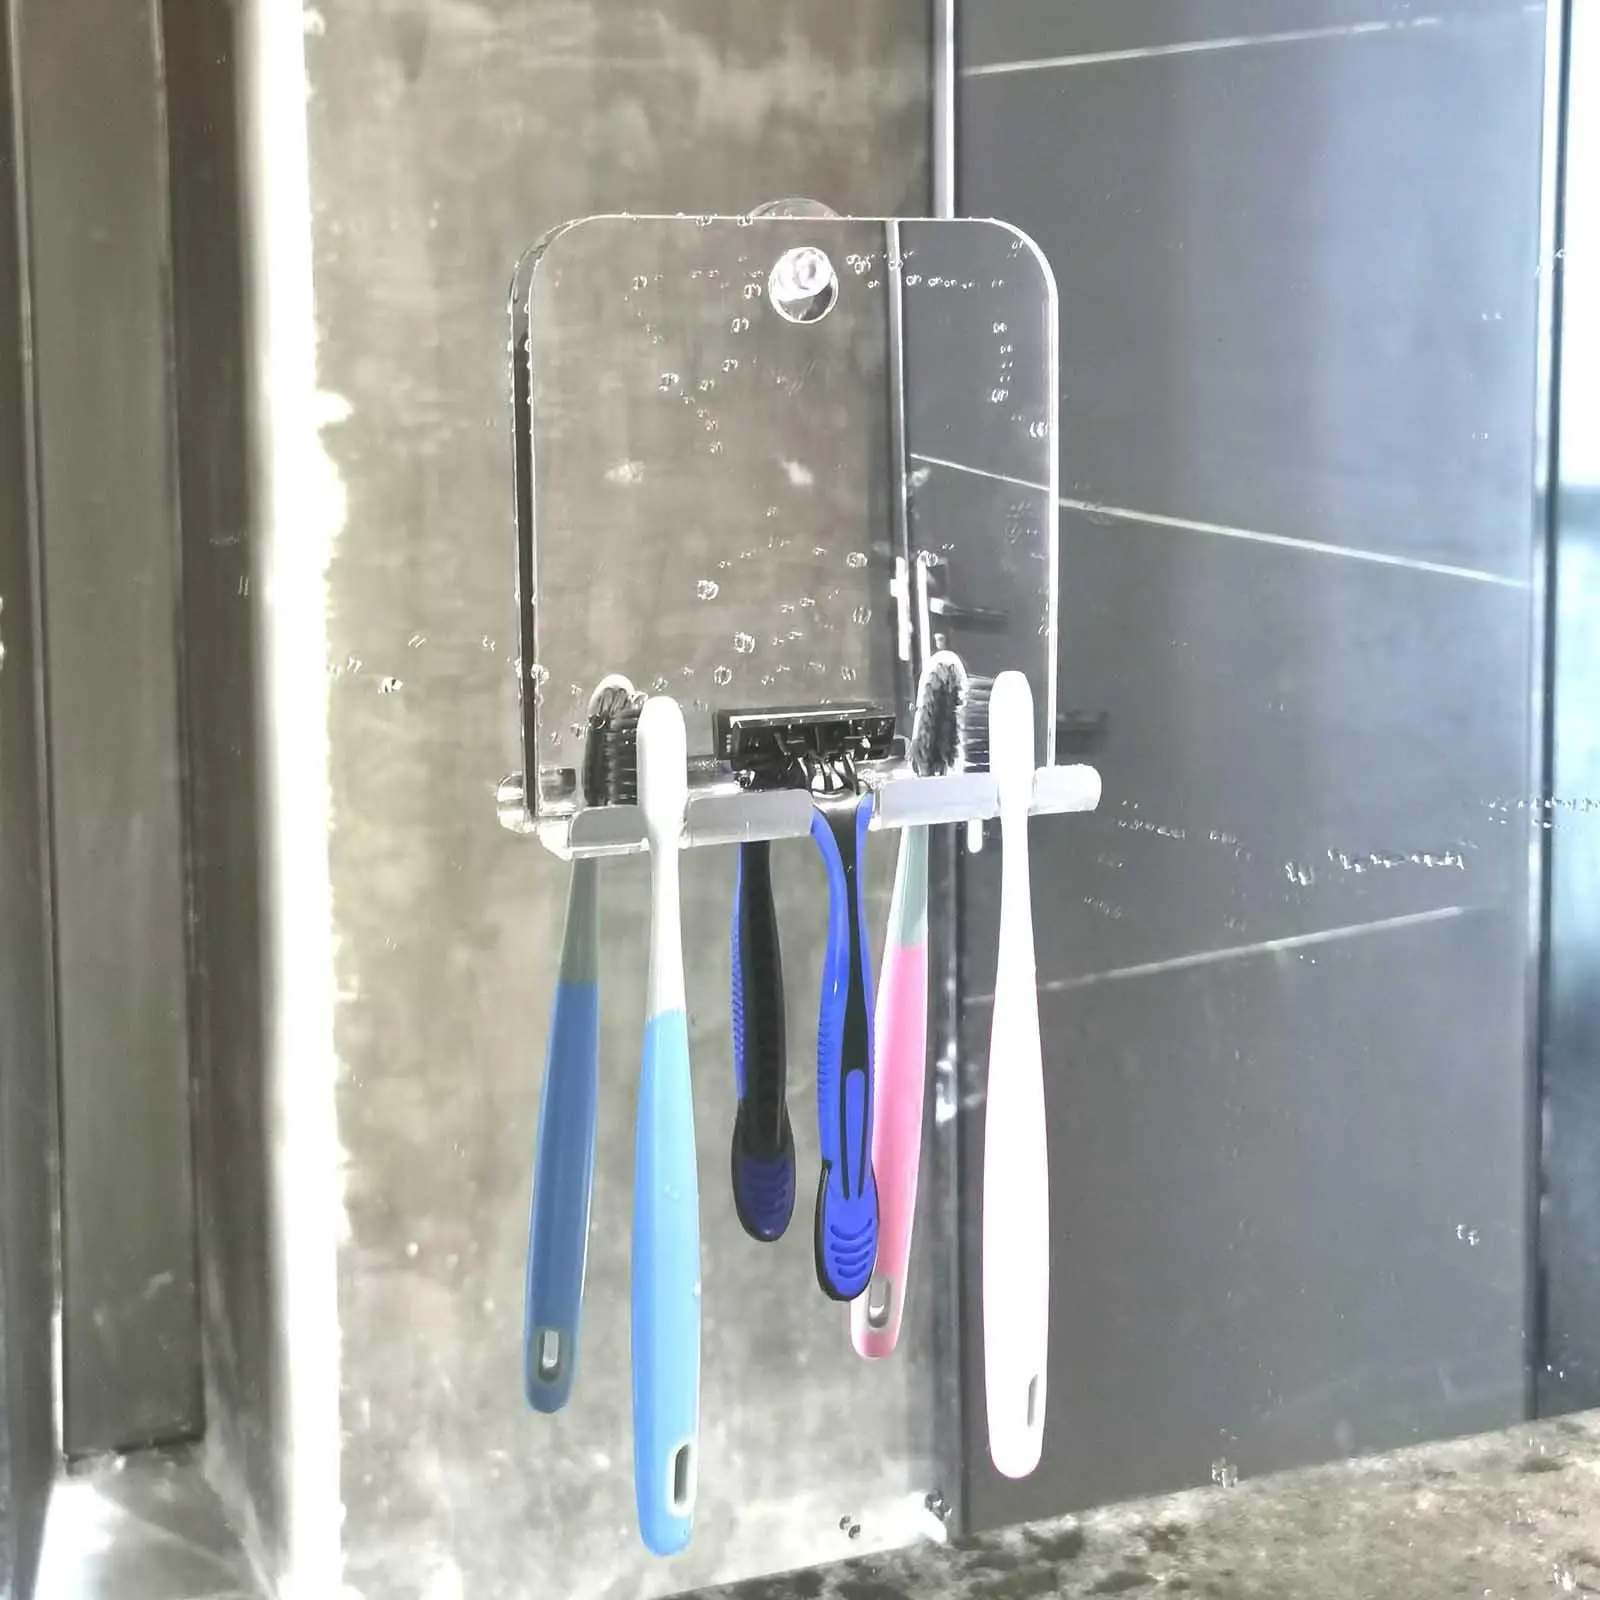  Shower Mirror, Includes 2 Suction Cup, -Fog Mirror, Makeup Shave Mirror, Frameless Shower Mirror, Wall Hanging Mirror